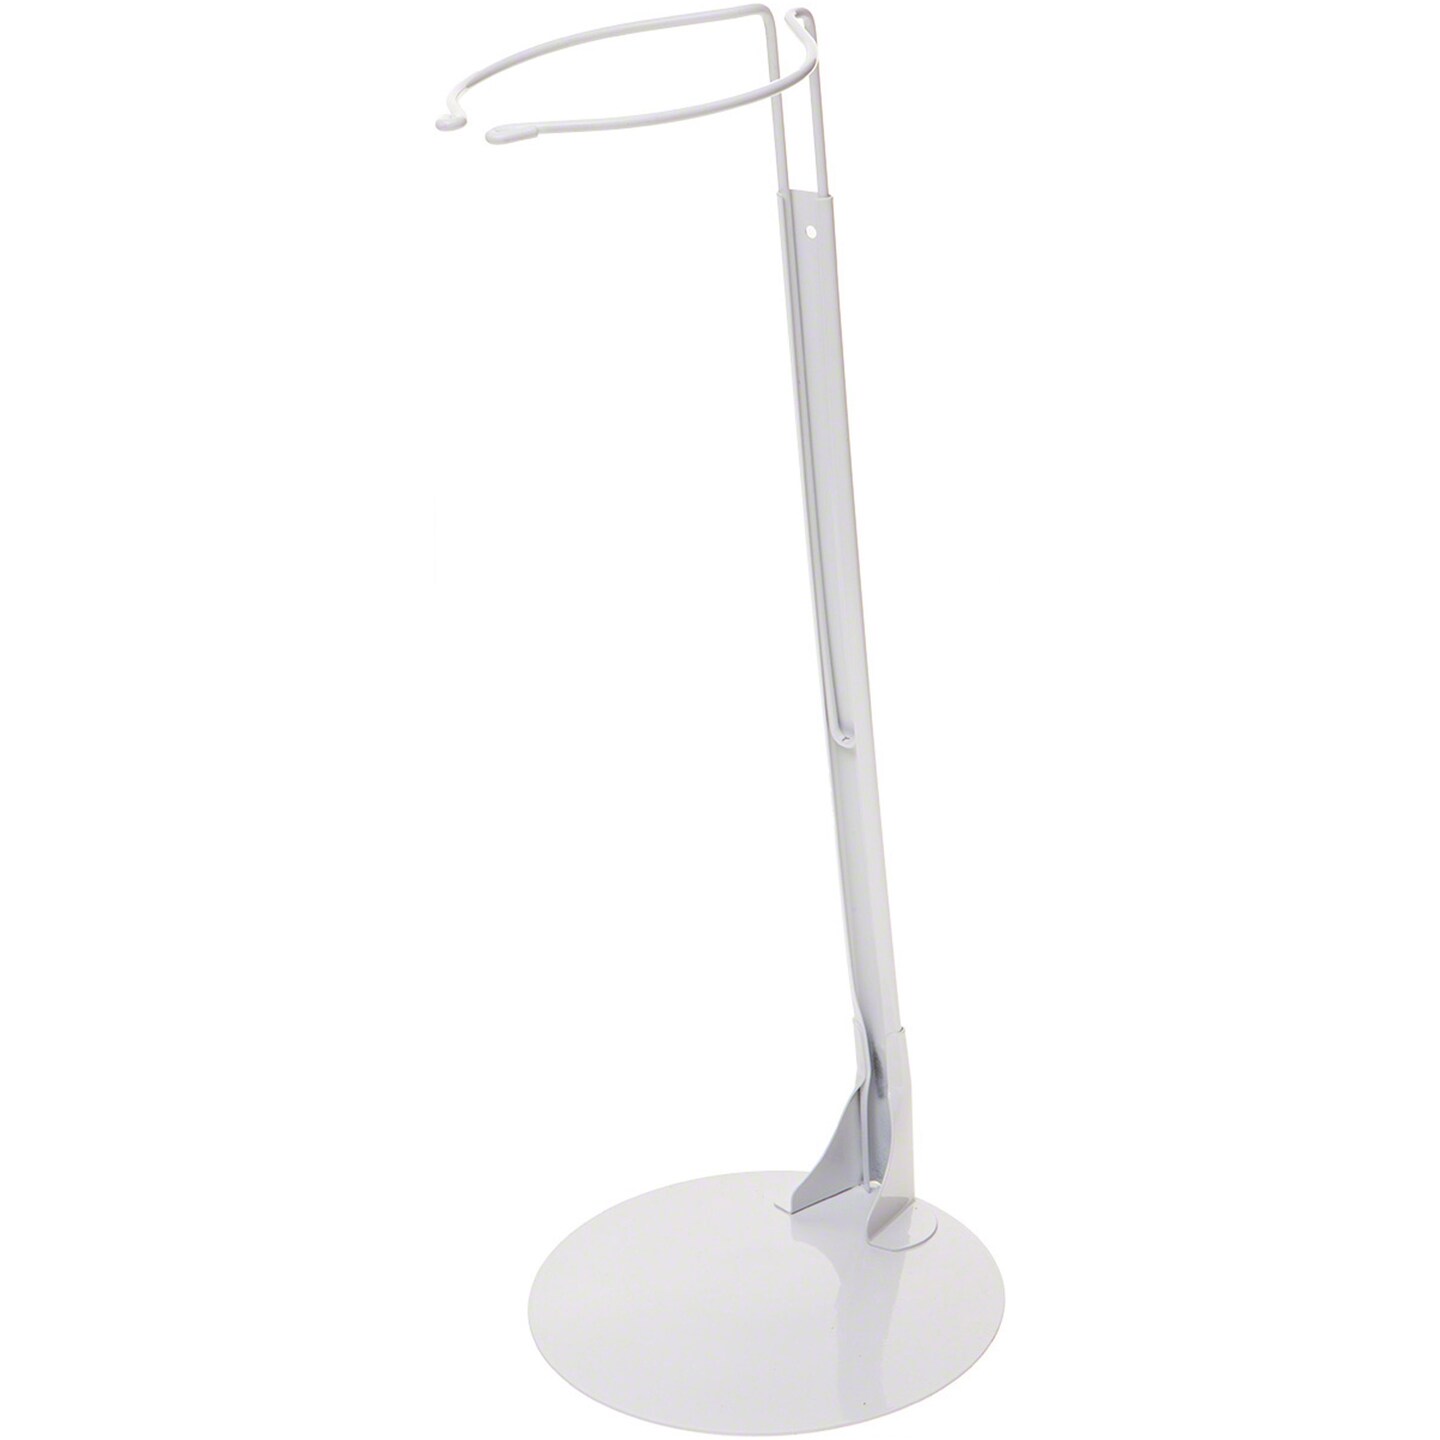 Kaiser 5001 White Adjustable Doll Stand, fits 33 to 42 inch Dolls, waist width adjusts from 4.75 to 6 inches